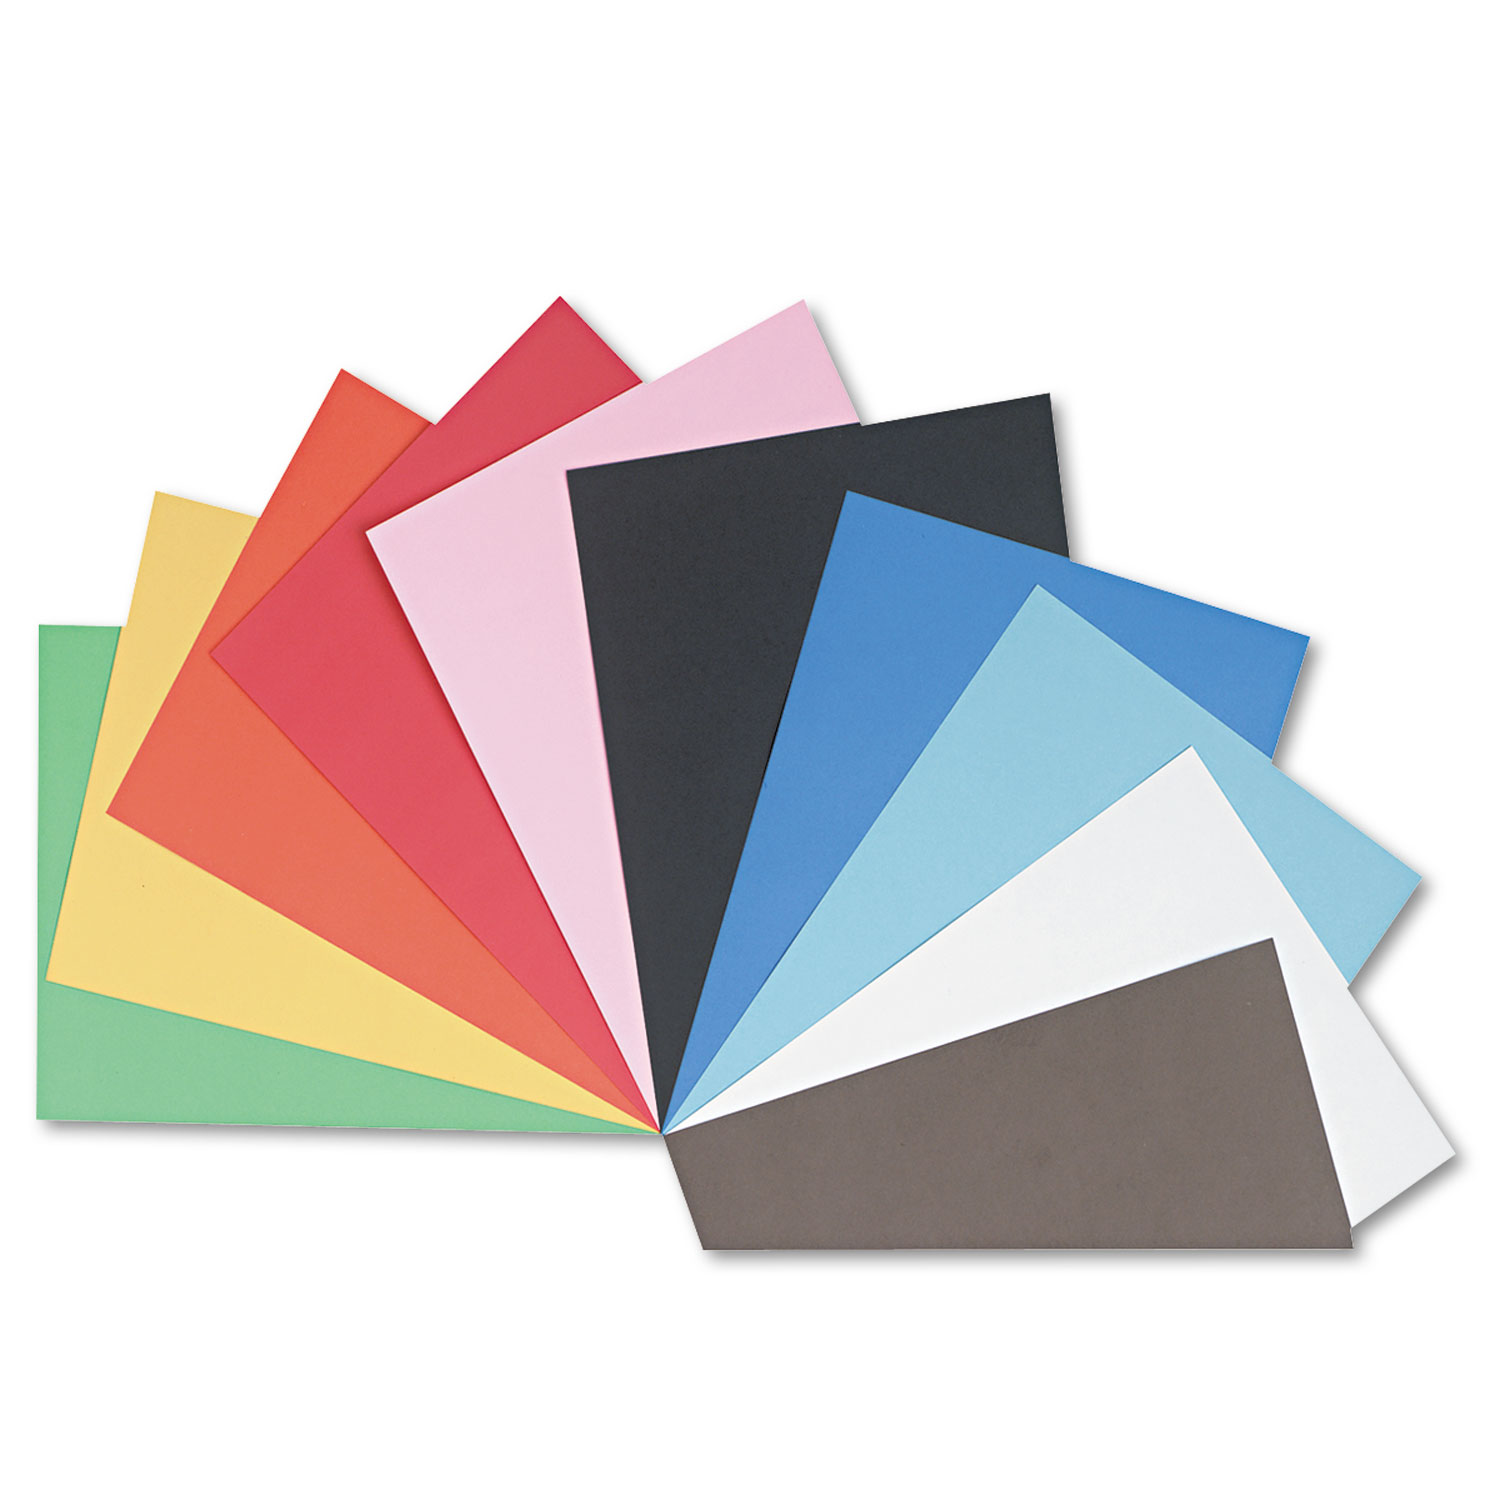  Pacon 103095 Tru-Ray Construction Paper, 76lb, 18 x 24, Assorted, 50/Pack (PAC103095) 